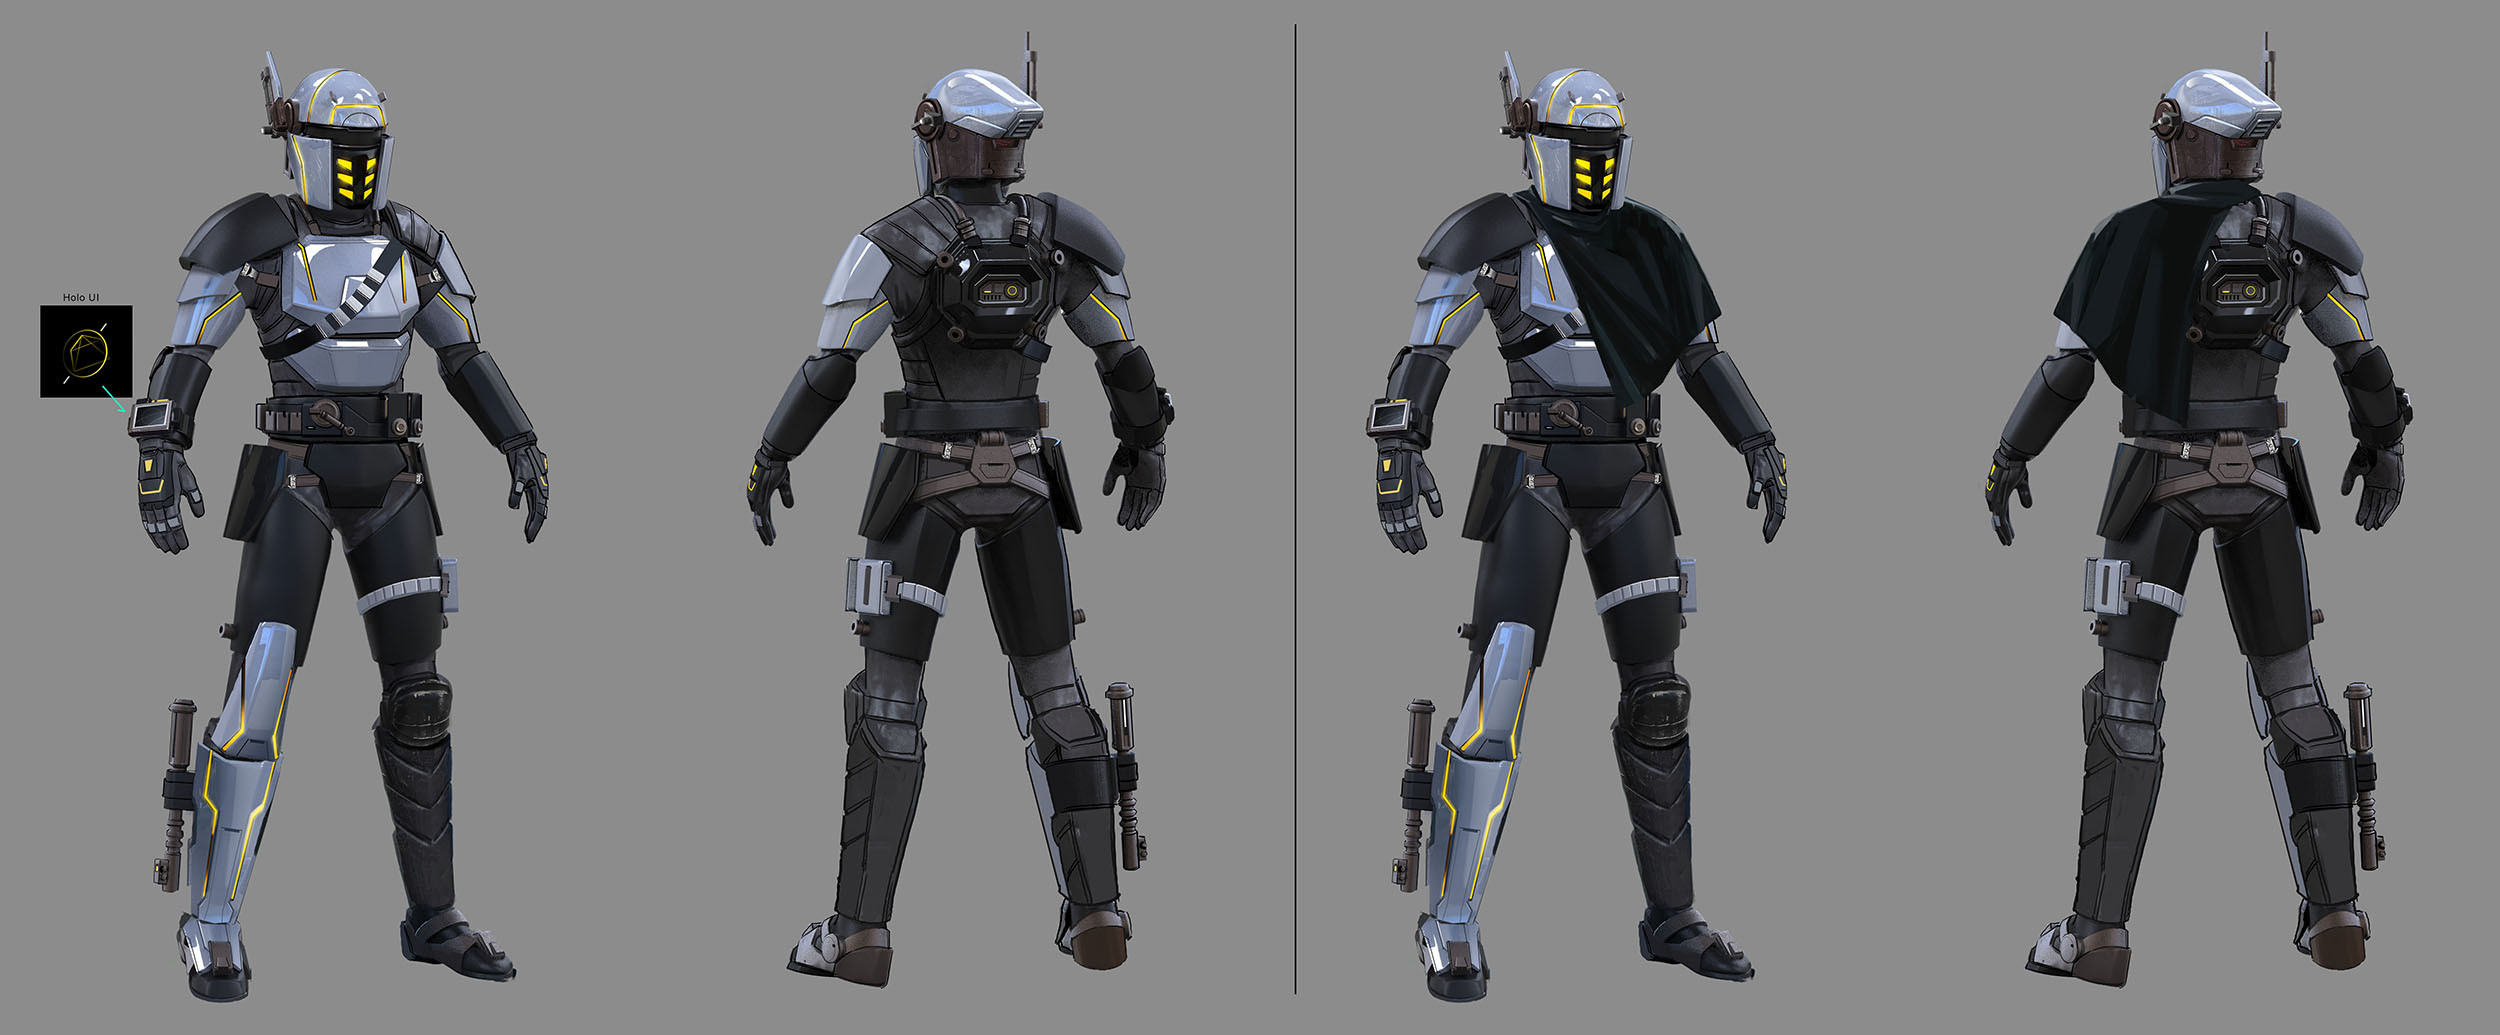 Swtor Cyber Agent armor.